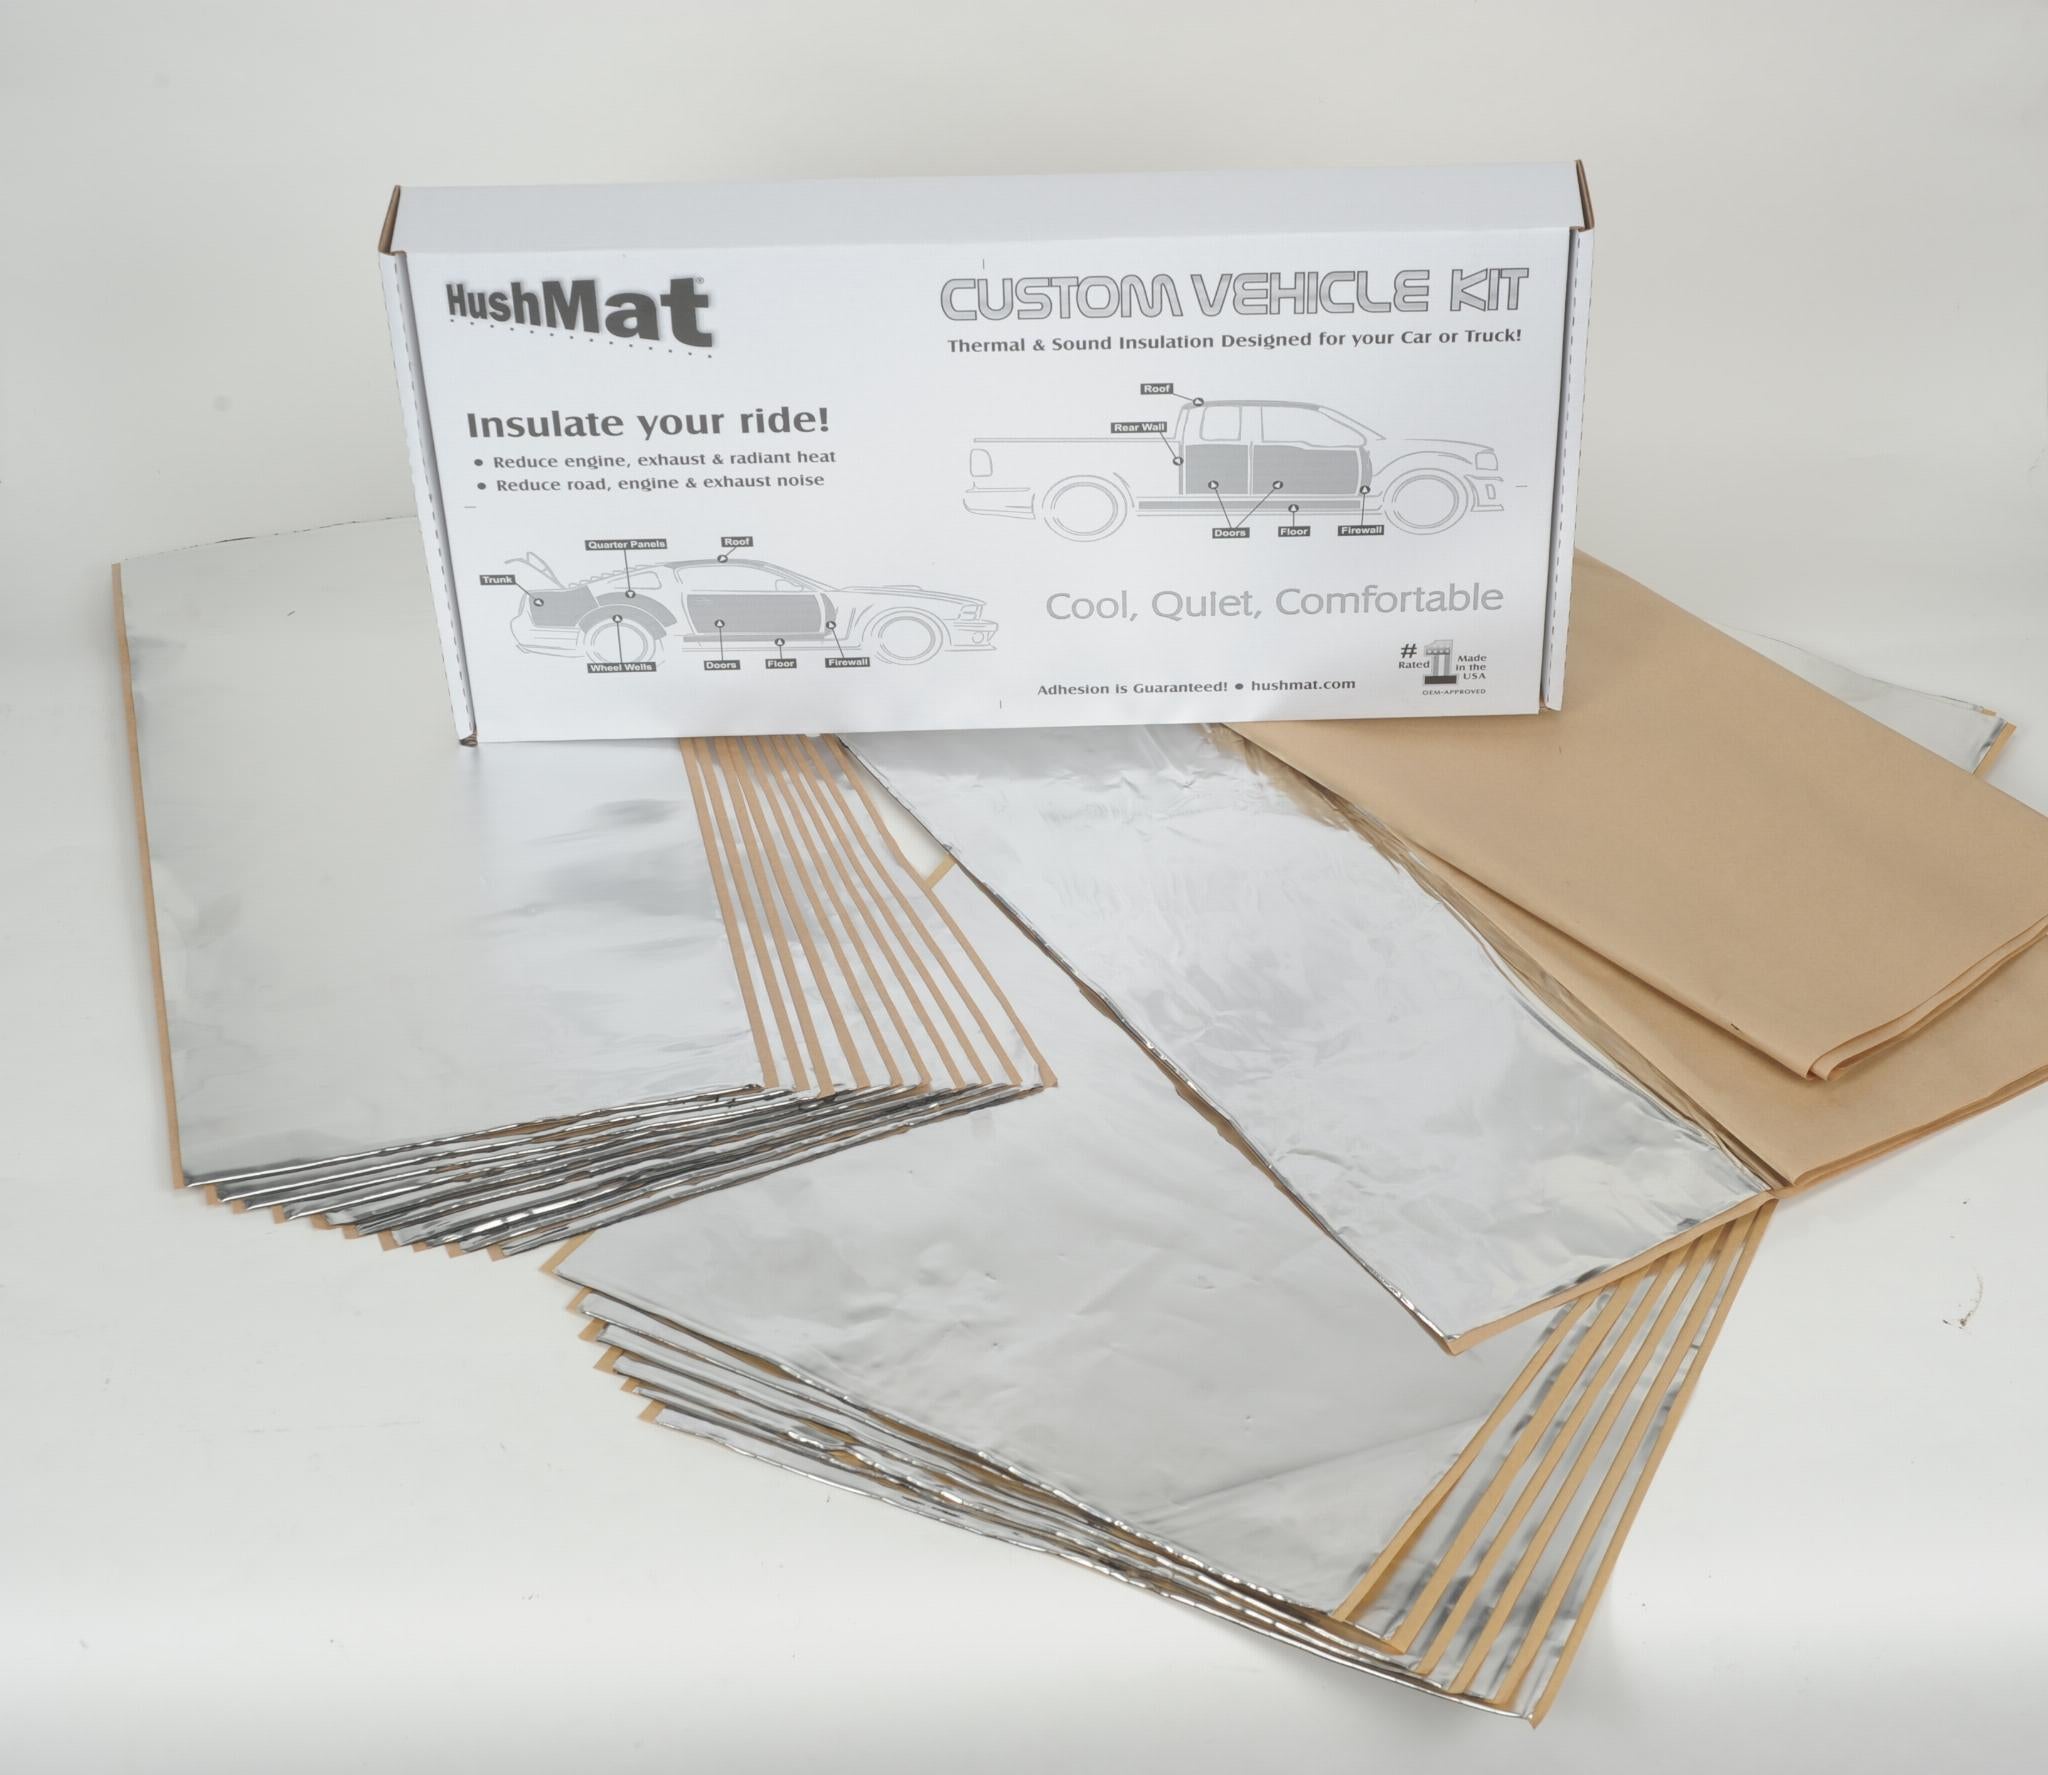 Hushmat 71200 Dishwasher Insulation Kit for all makes and models